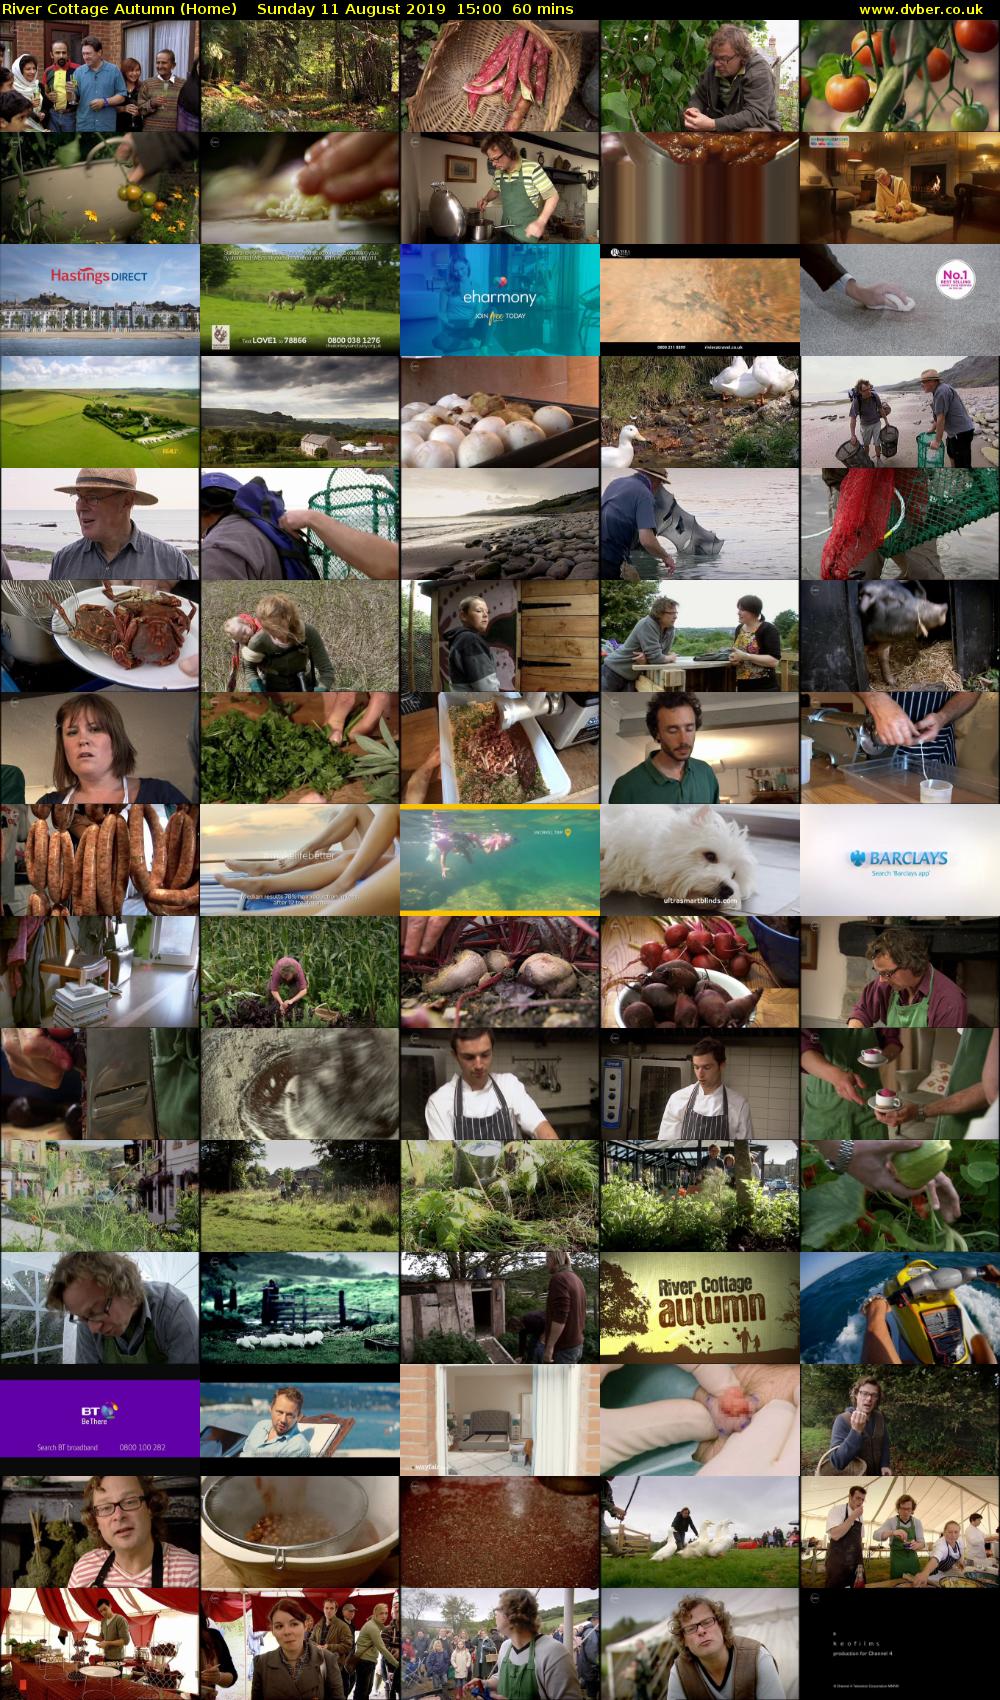 River Cottage Autumn (Home) Sunday 11 August 2019 15:00 - 16:00